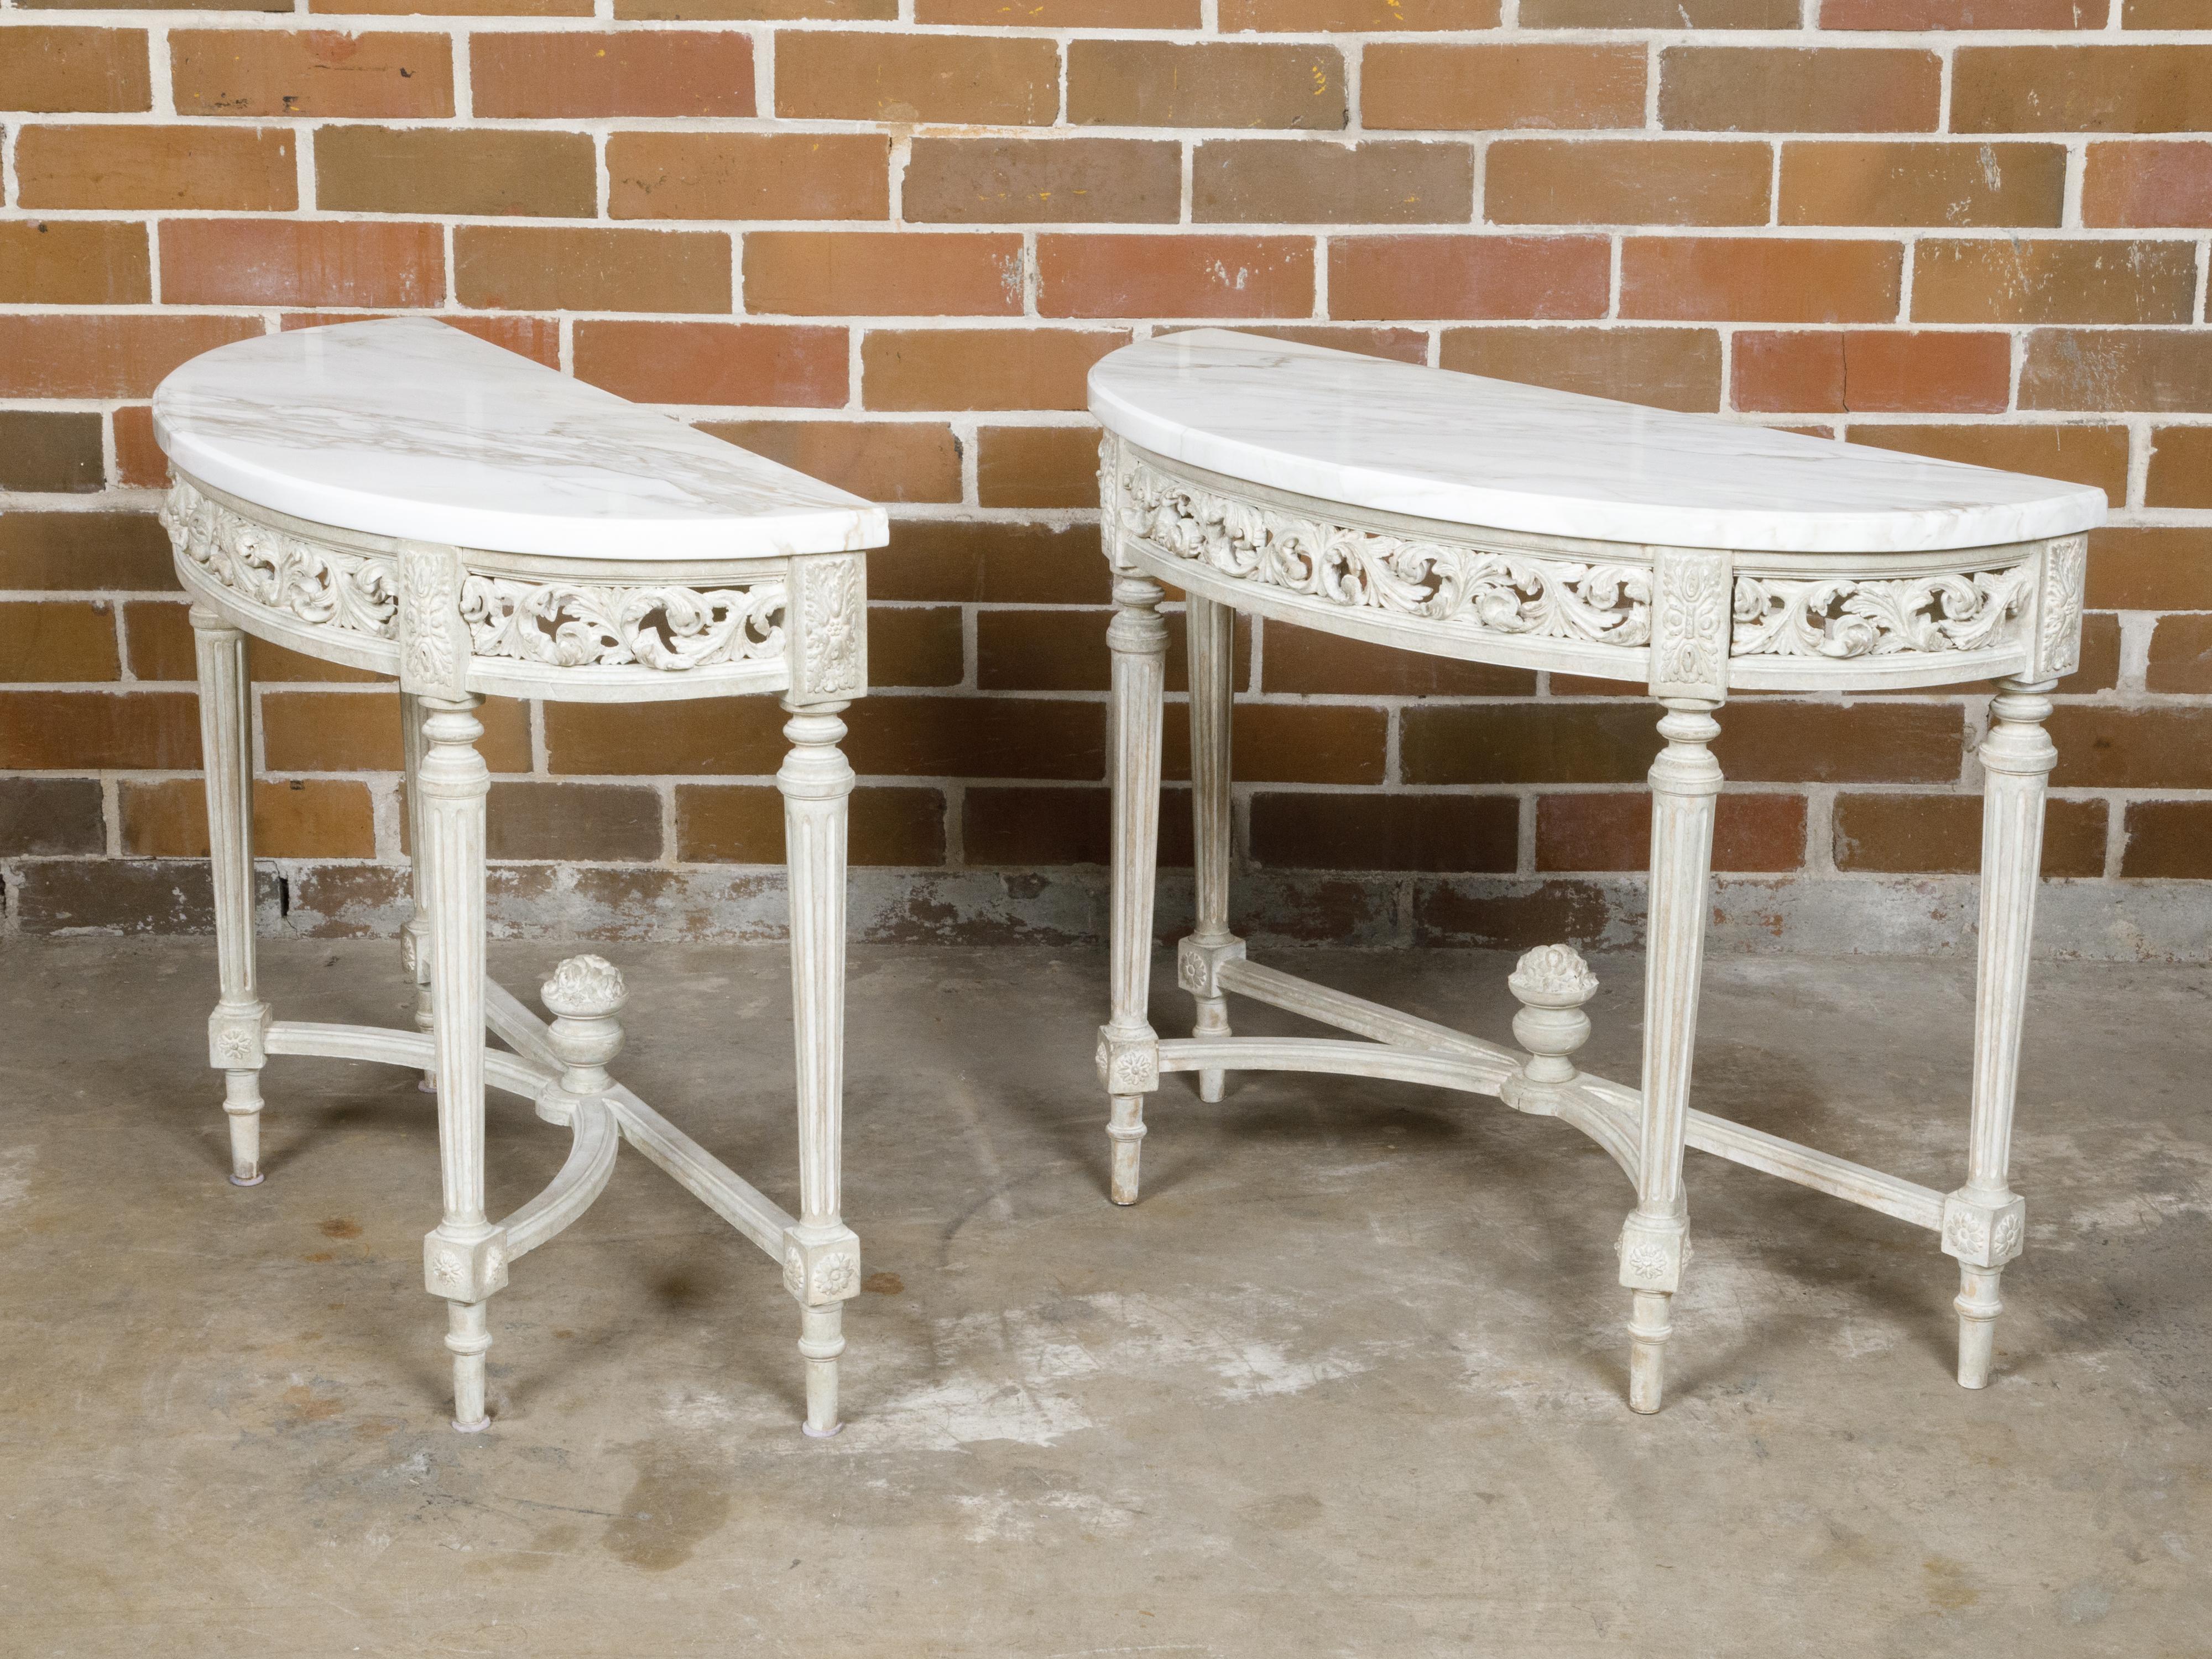 Pair of French Louis XVI Style Painted Demilune Console Tables with Marble Tops For Sale 4